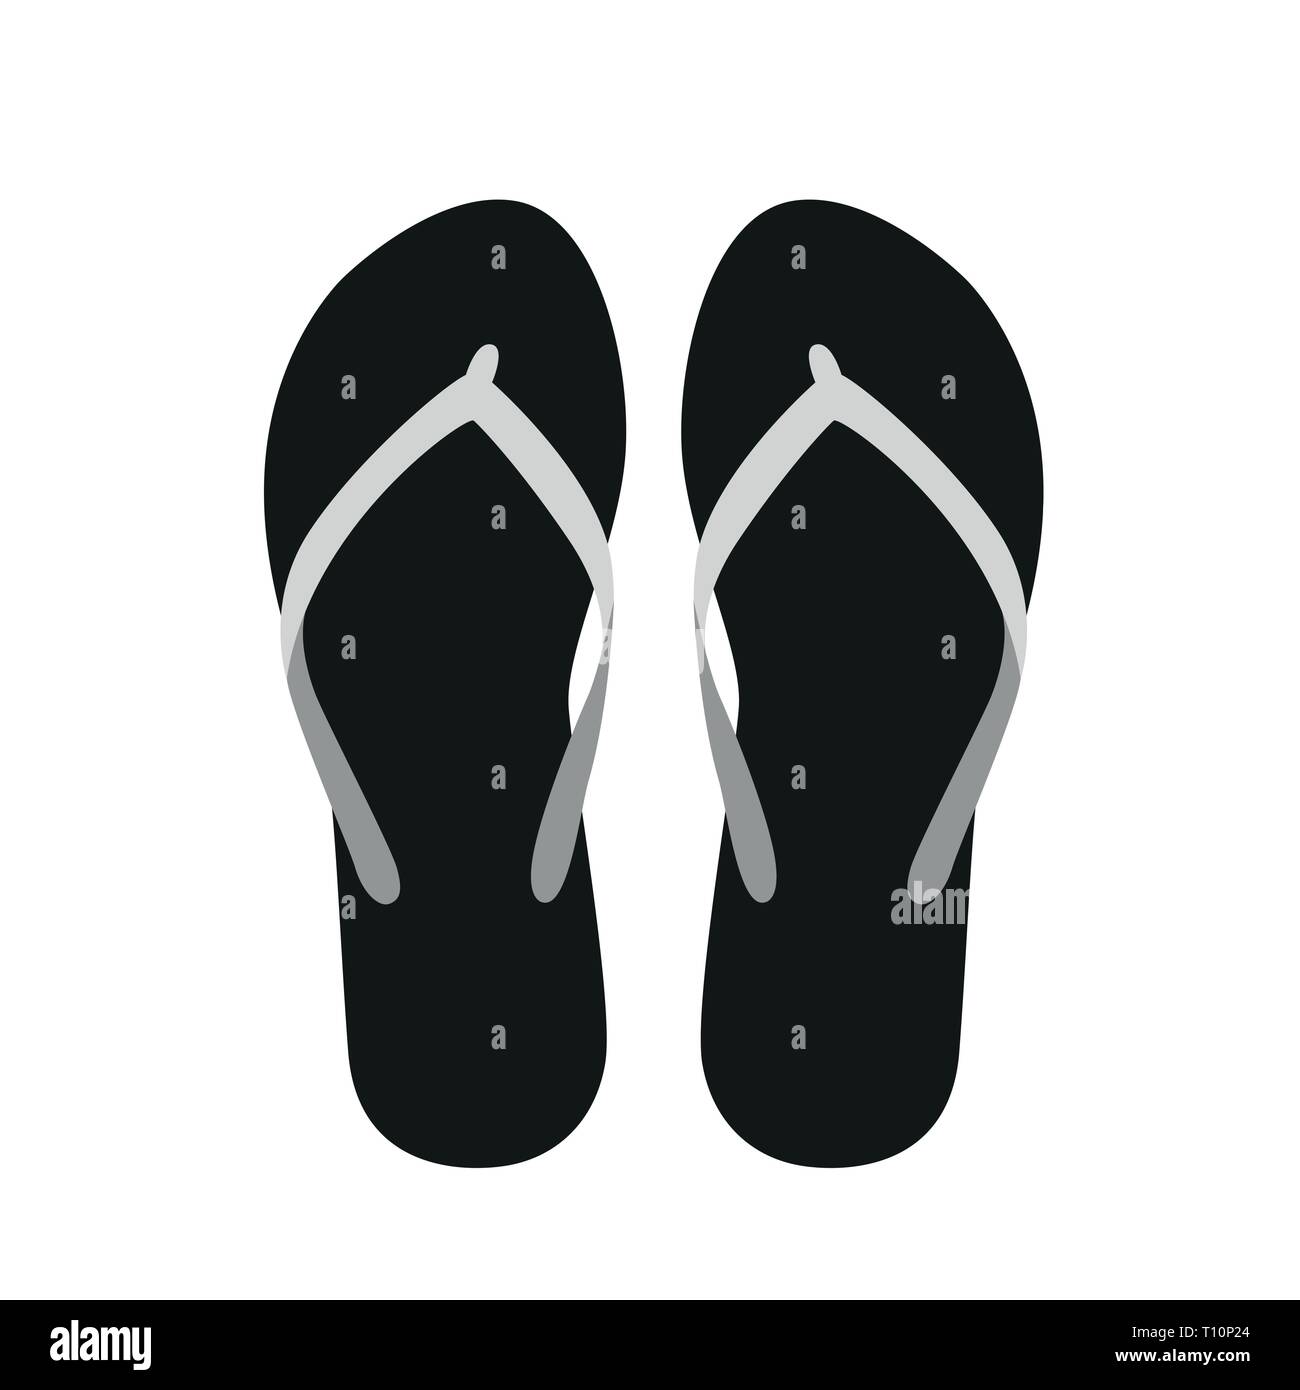 flip flops simple pictogram isolated on a white background vector ...